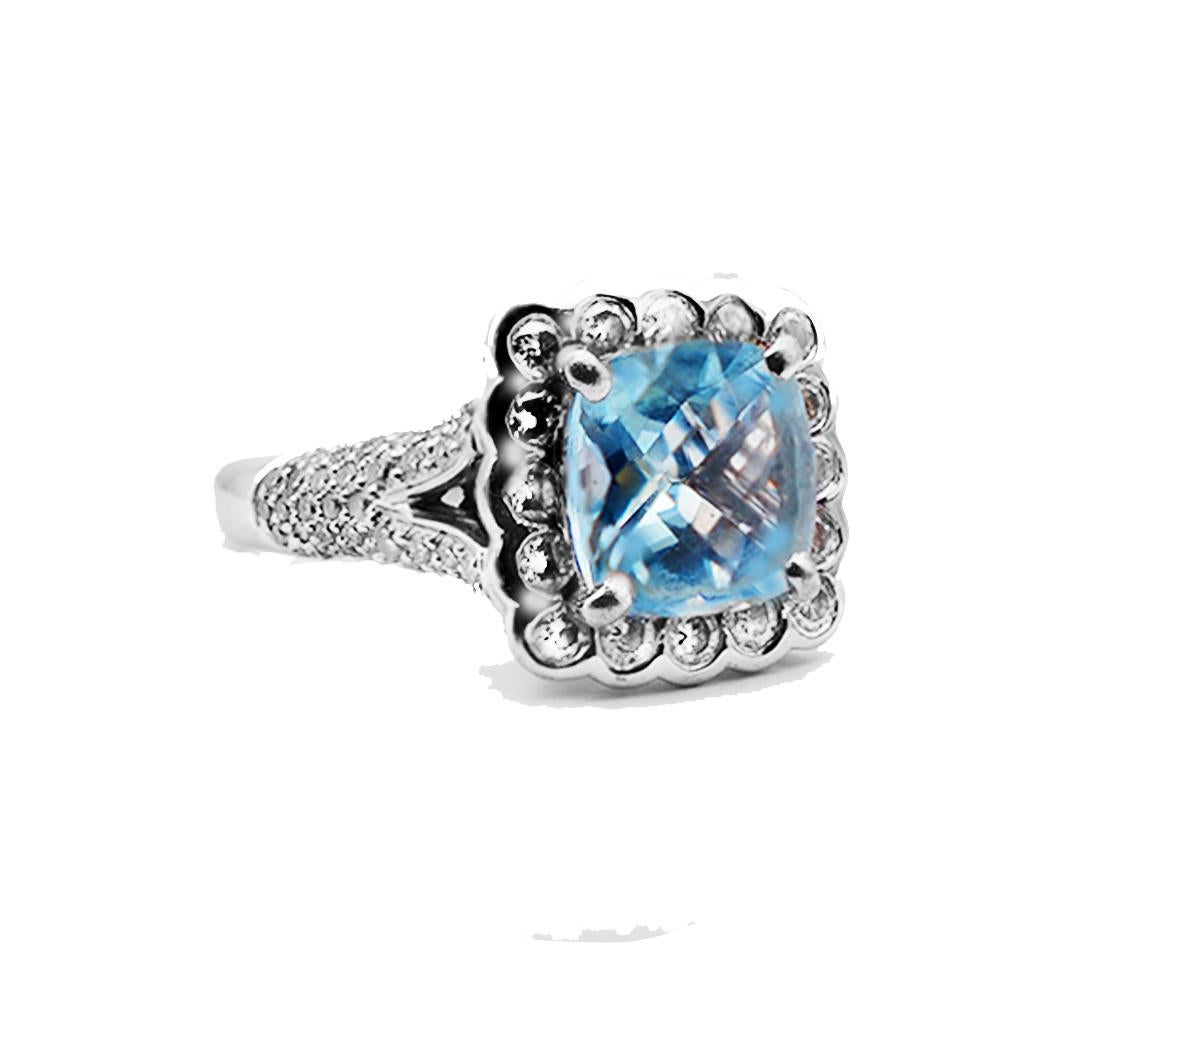 Charles Krypell designer of this beautiful tapestry, cushion-cut Aquamarine blue stone sits in a pave Diamond ring. The face of the halo measures 14mm 

Center, Aquamarine tapestry is 2.35 carats estimated weight and is measuring 9.07 x 9.17 x 4.50